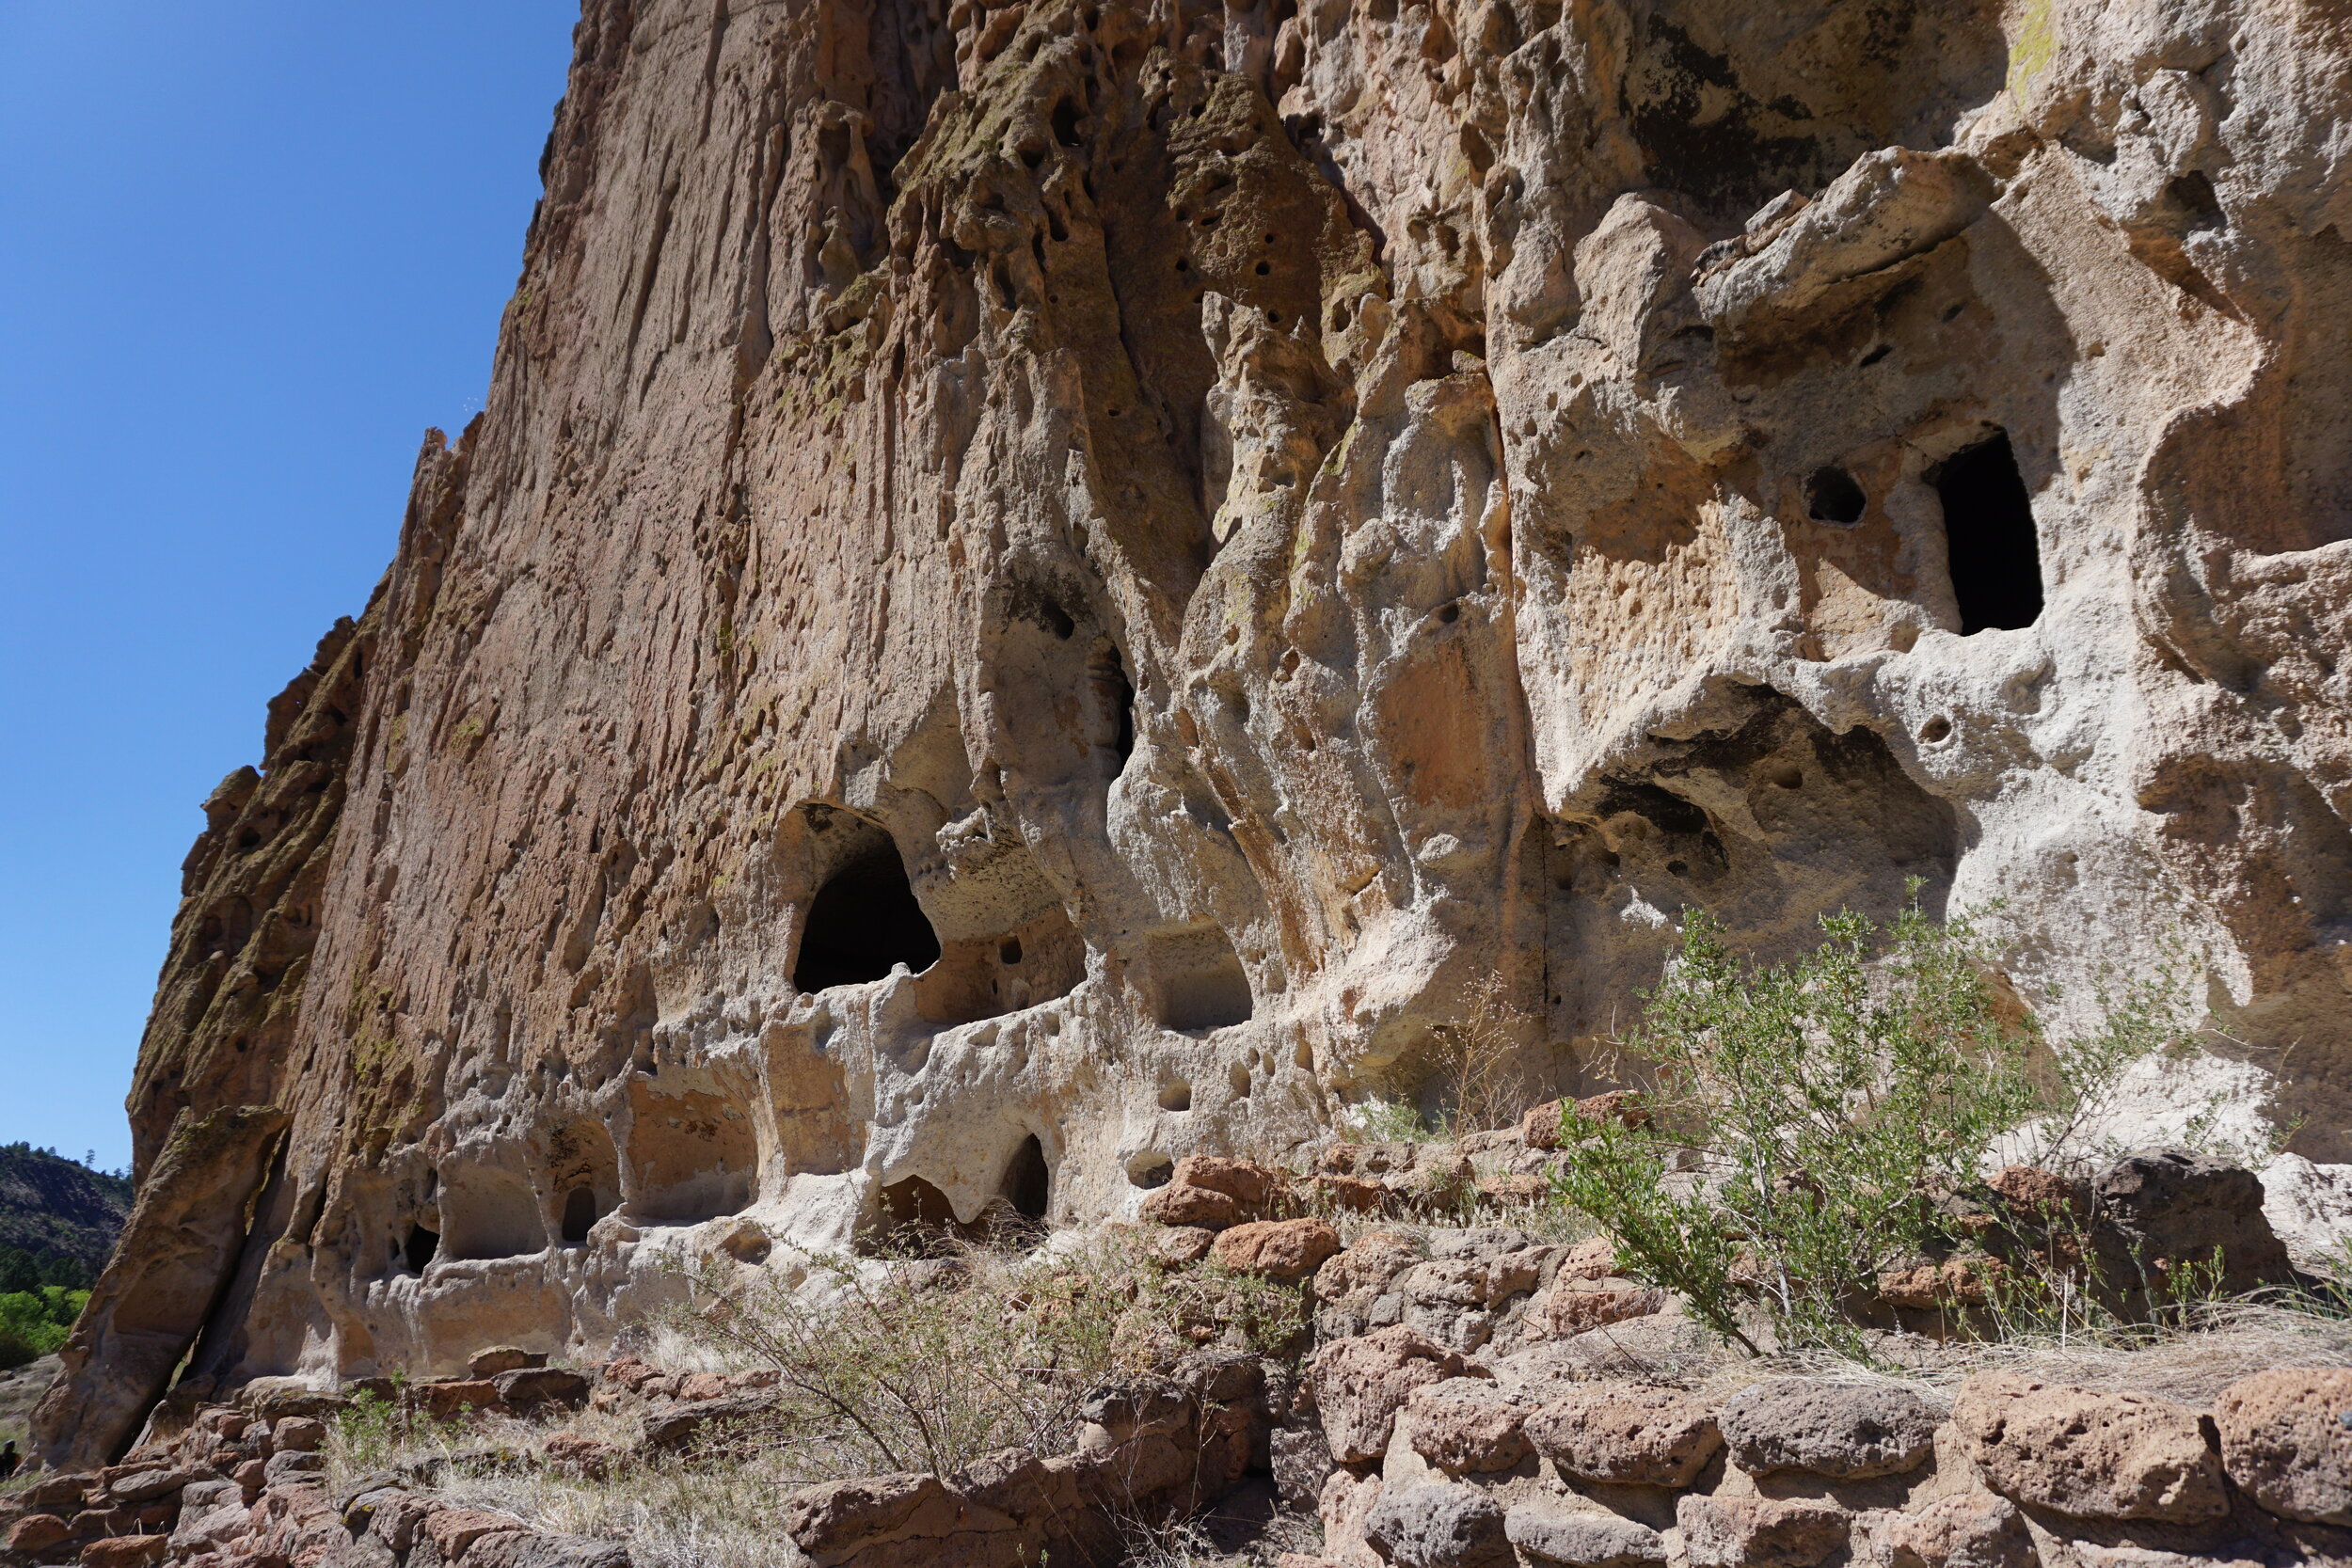 Stone ruins and cliff dwellings at Bandelier National Monument